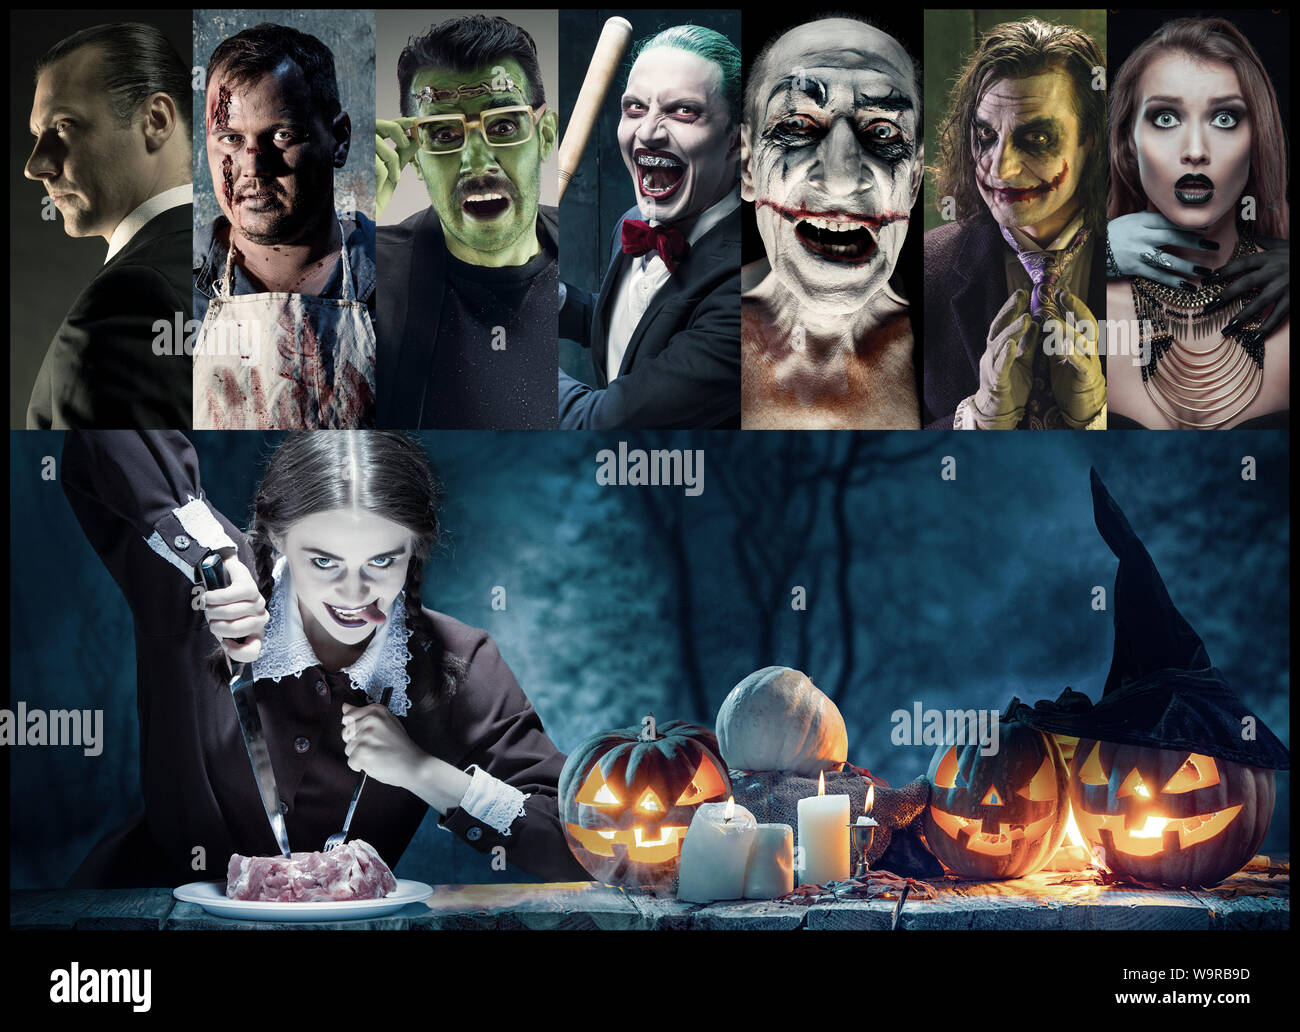 Mystical characters in nightly creative collage made of different photos of 7 models. Concept of horror, Halloween. Pumpking with the candle indside it. Witches, demons, murderers. Autumn's tradition. Stock Photo